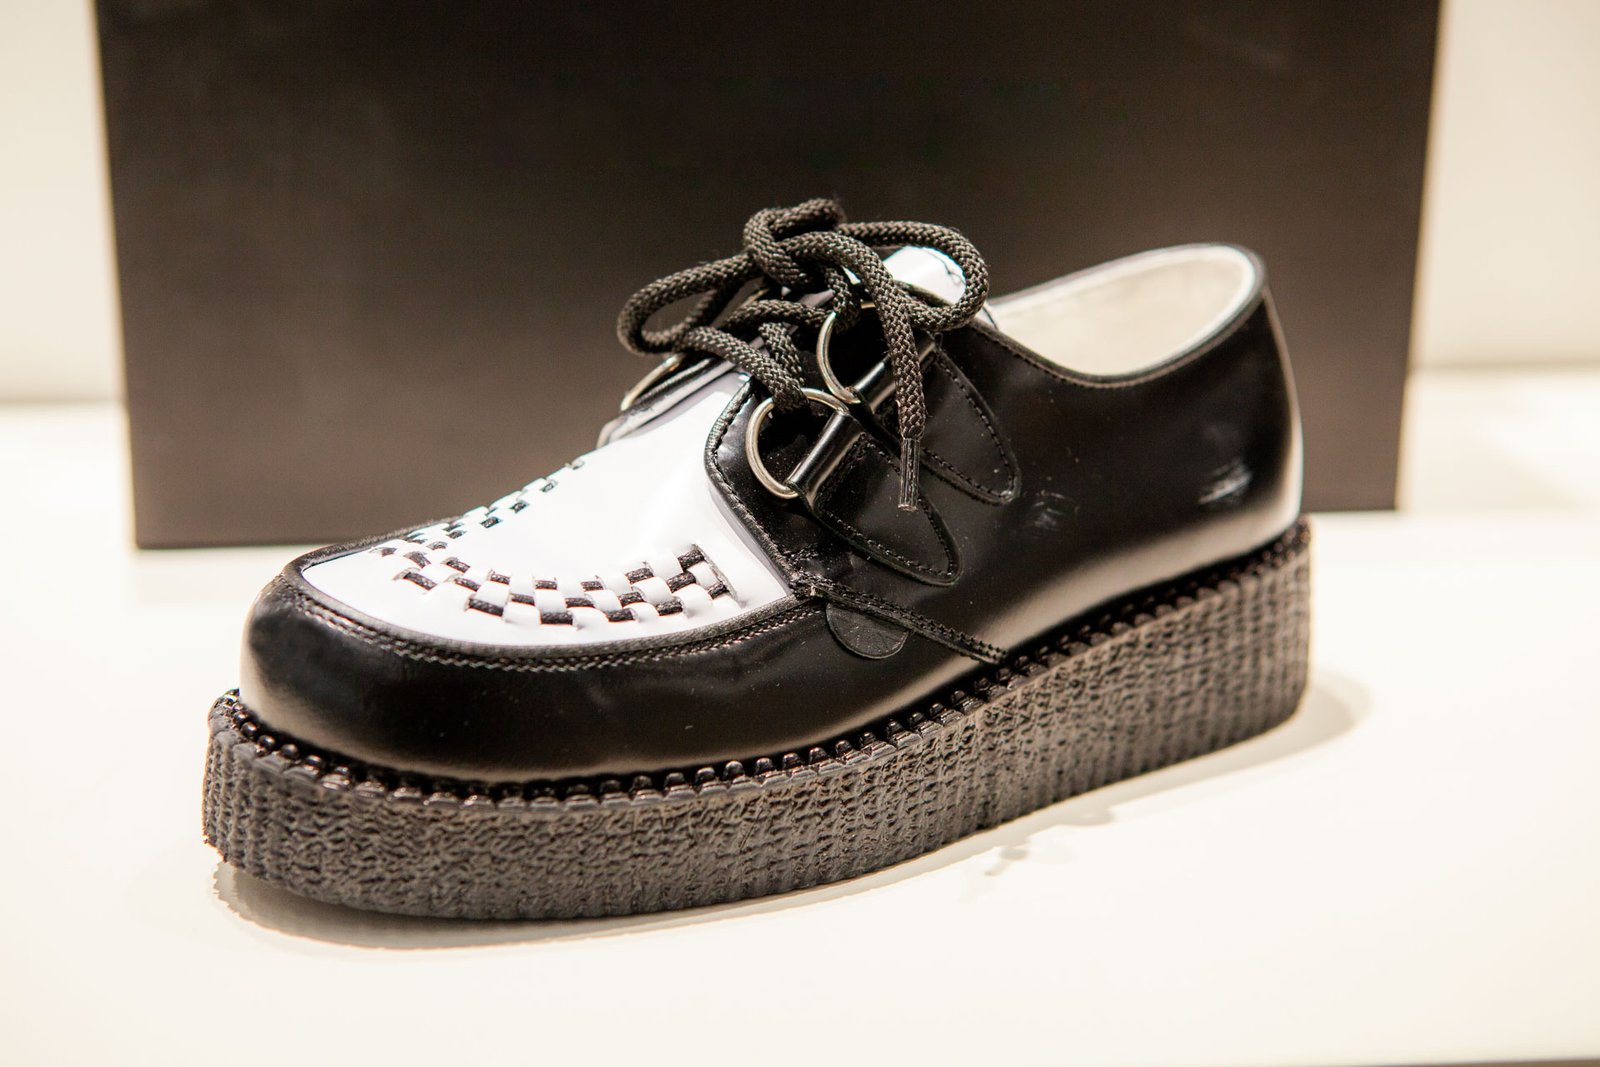 Chaussure Creepers Homme noire et blanche